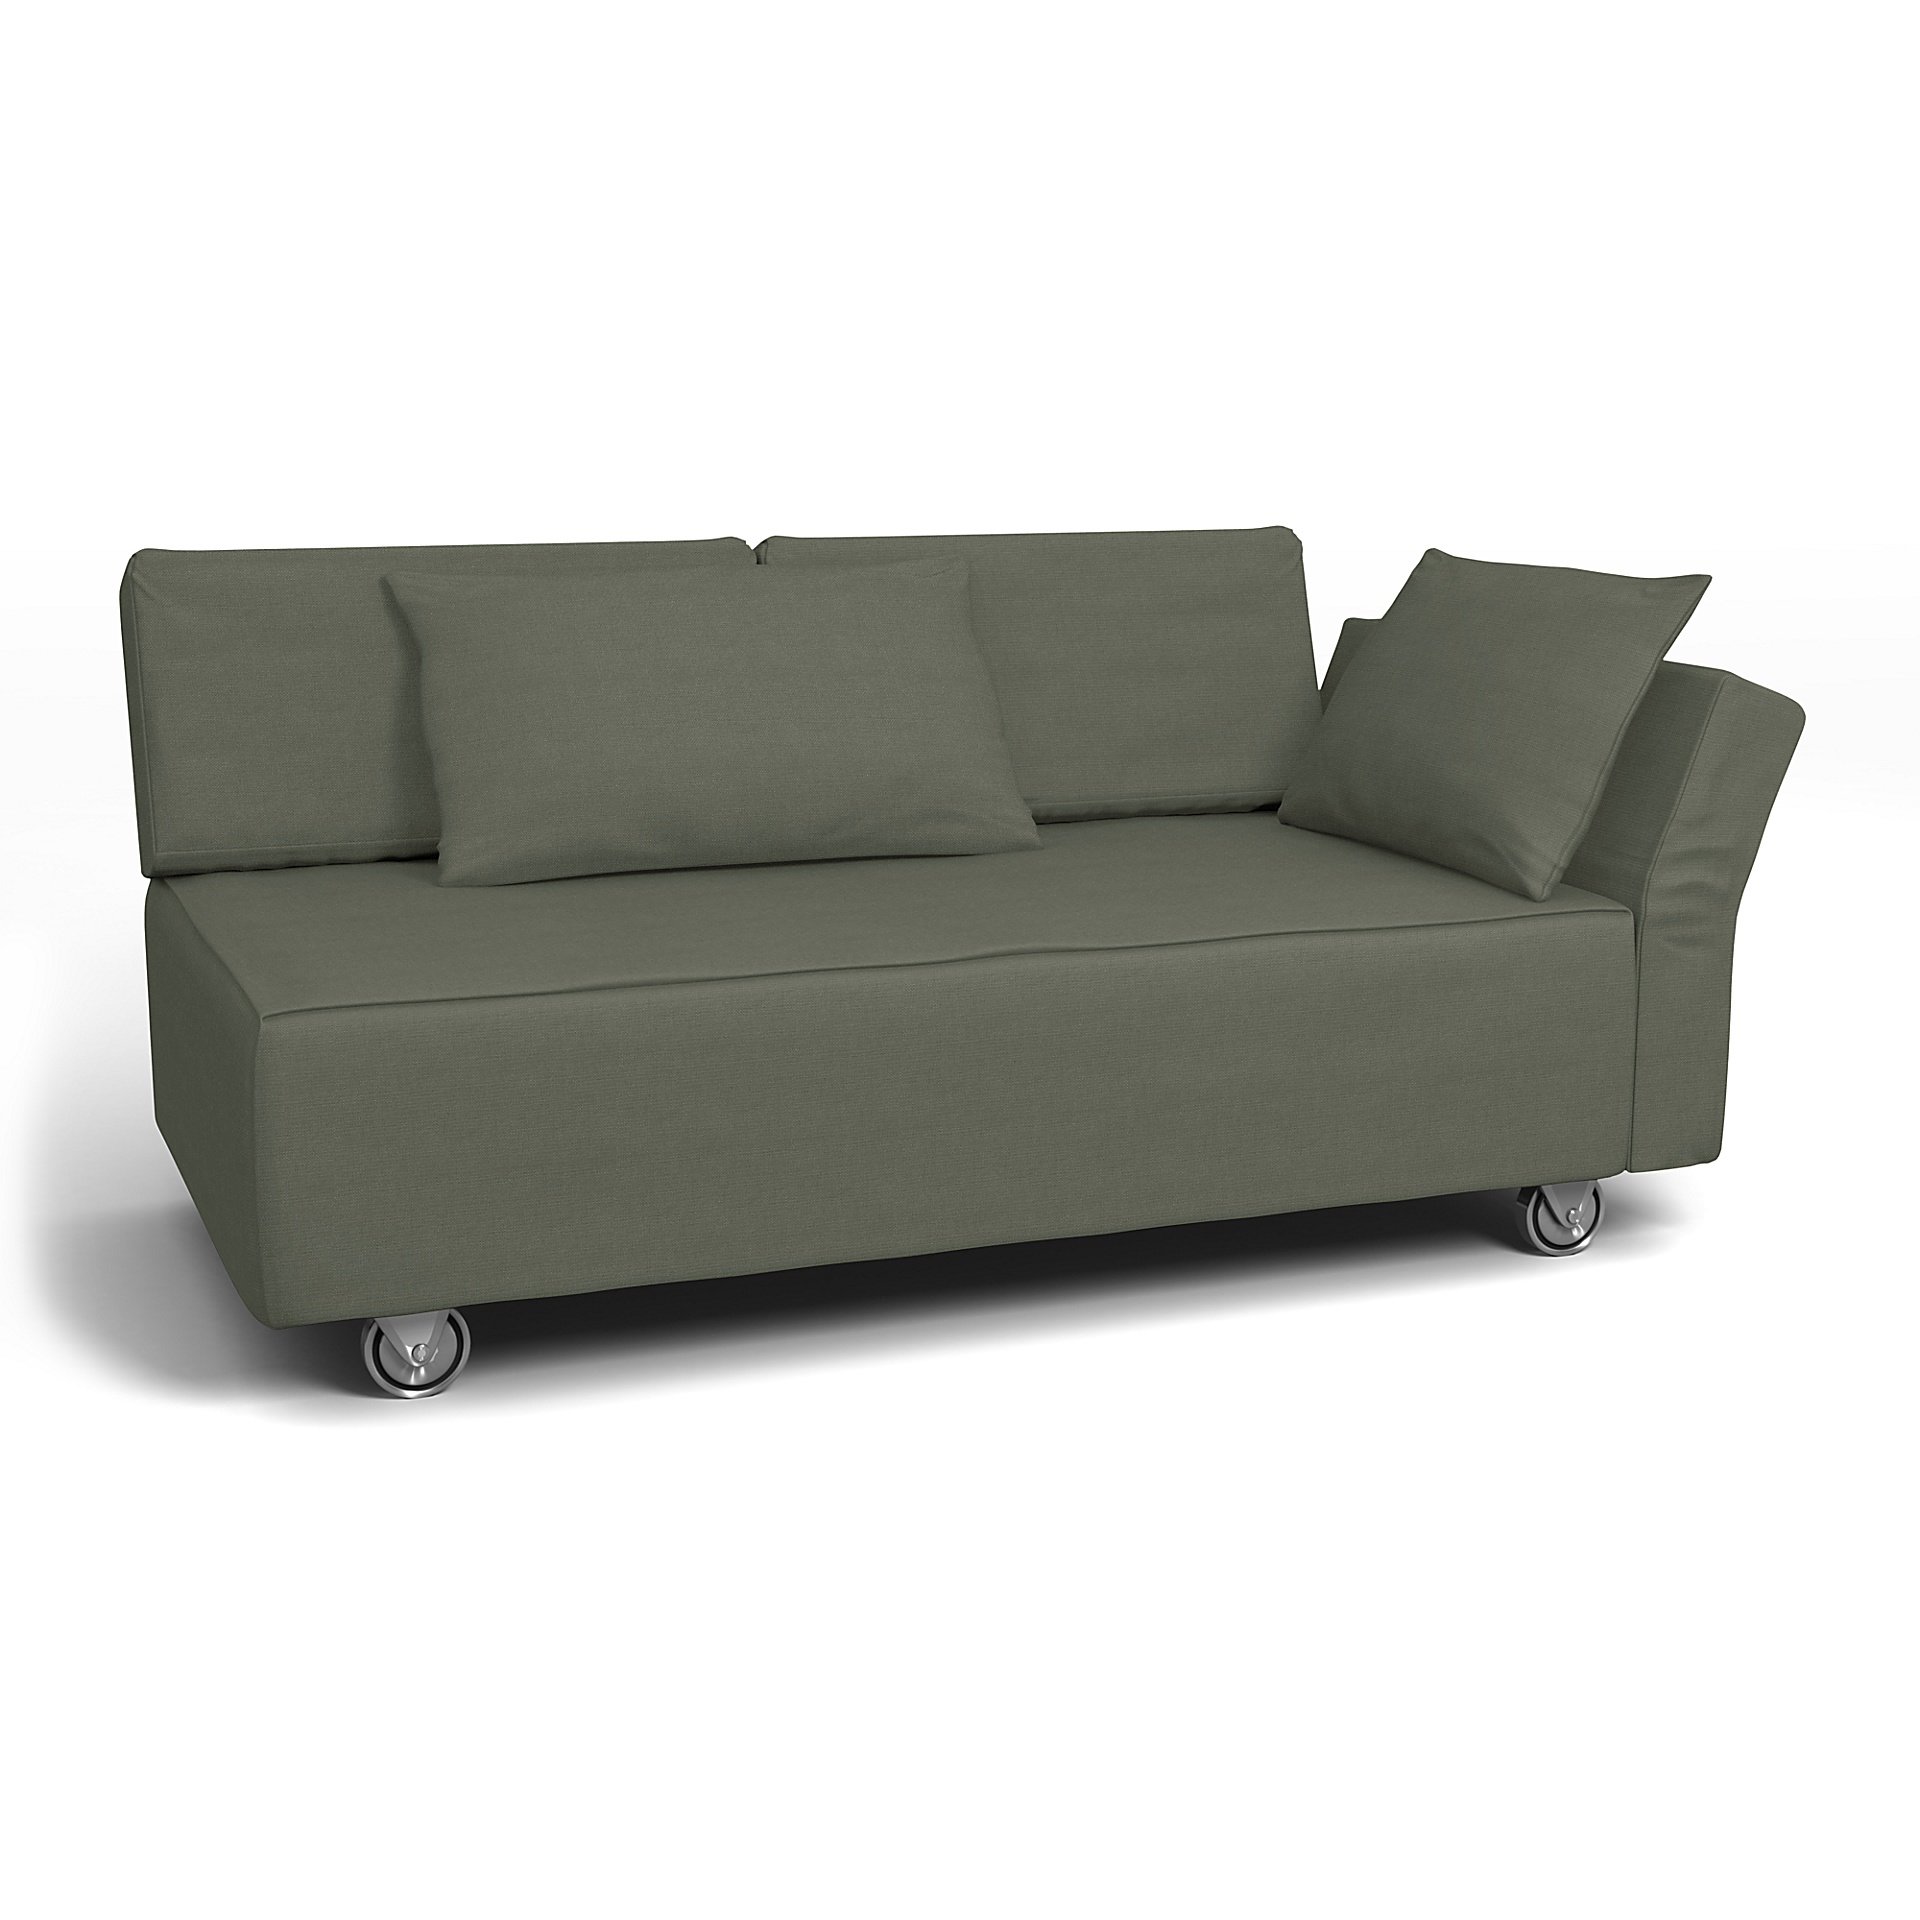 IKEA - Falsterbo 2 Seat Sofa with Right Arm Cover, Rosemary, Linen - Bemz